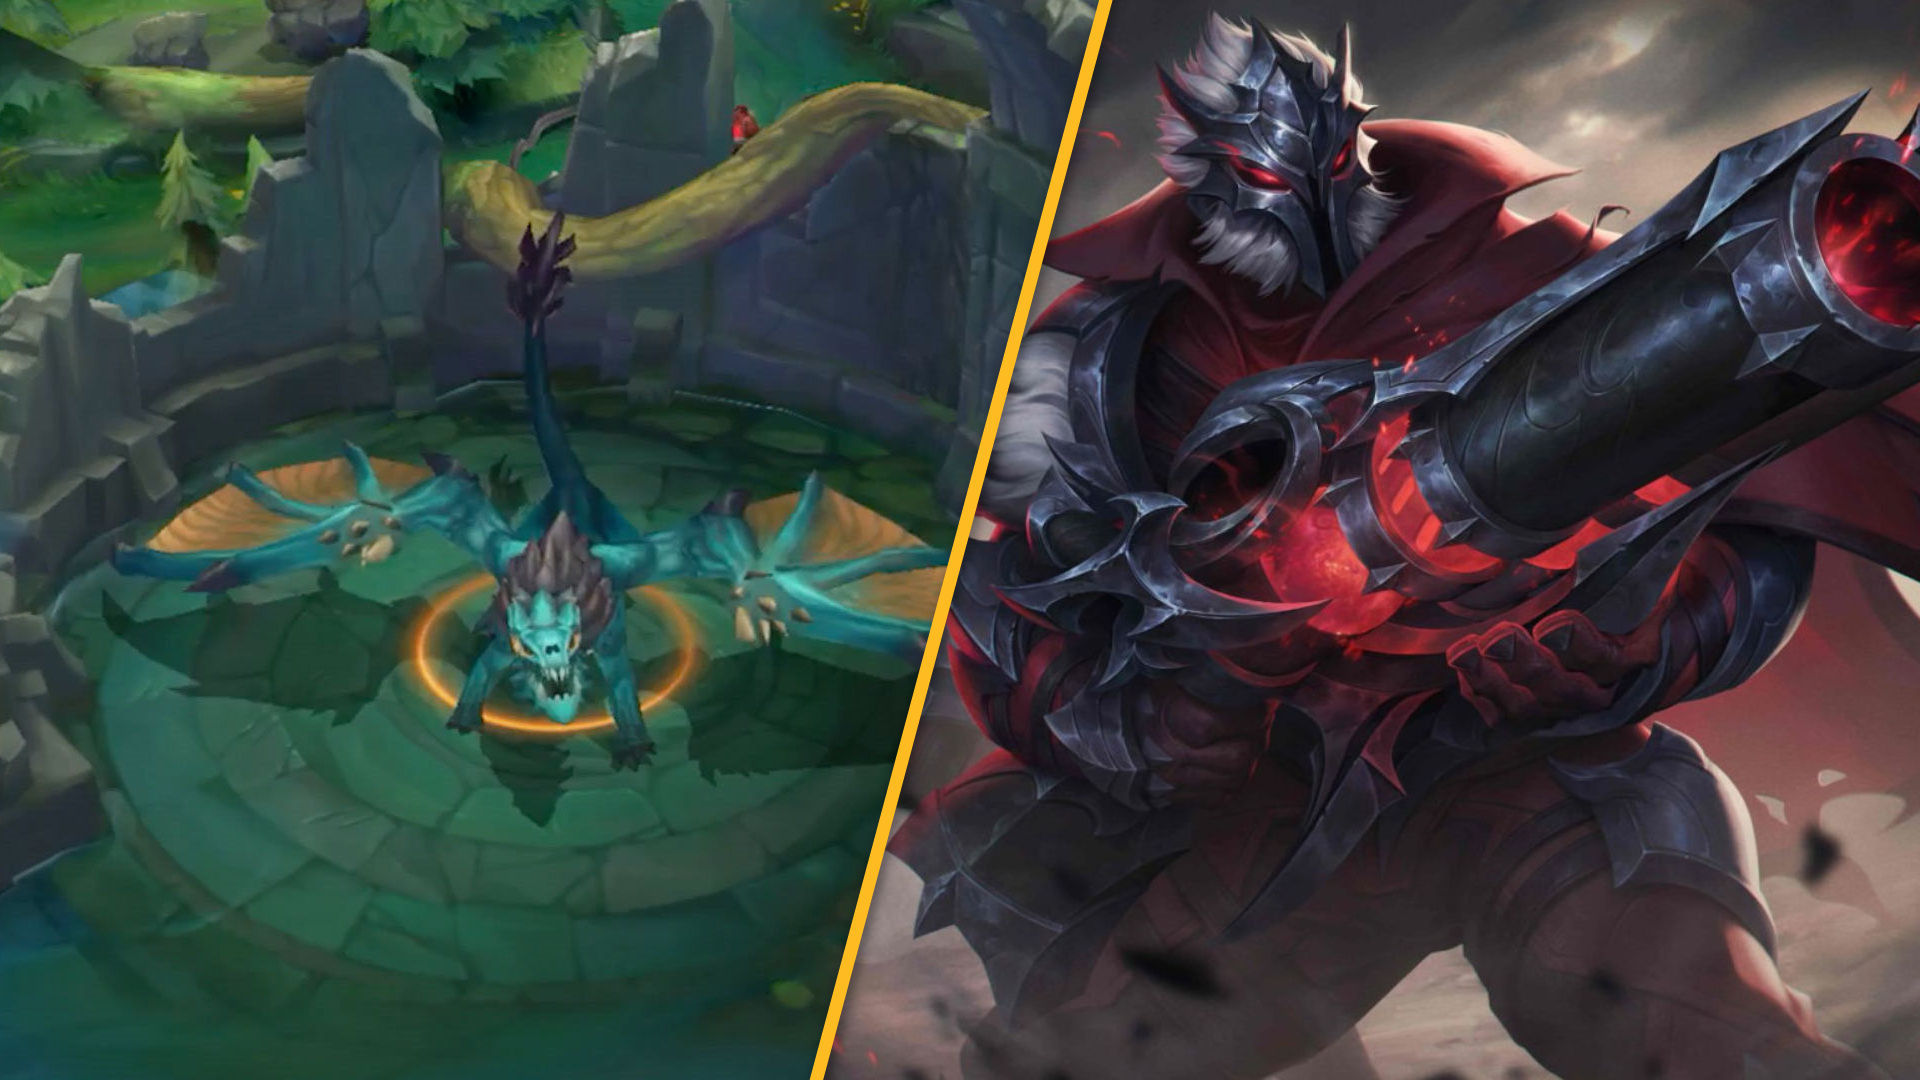 Welcome to League of Legends: Wild Rift